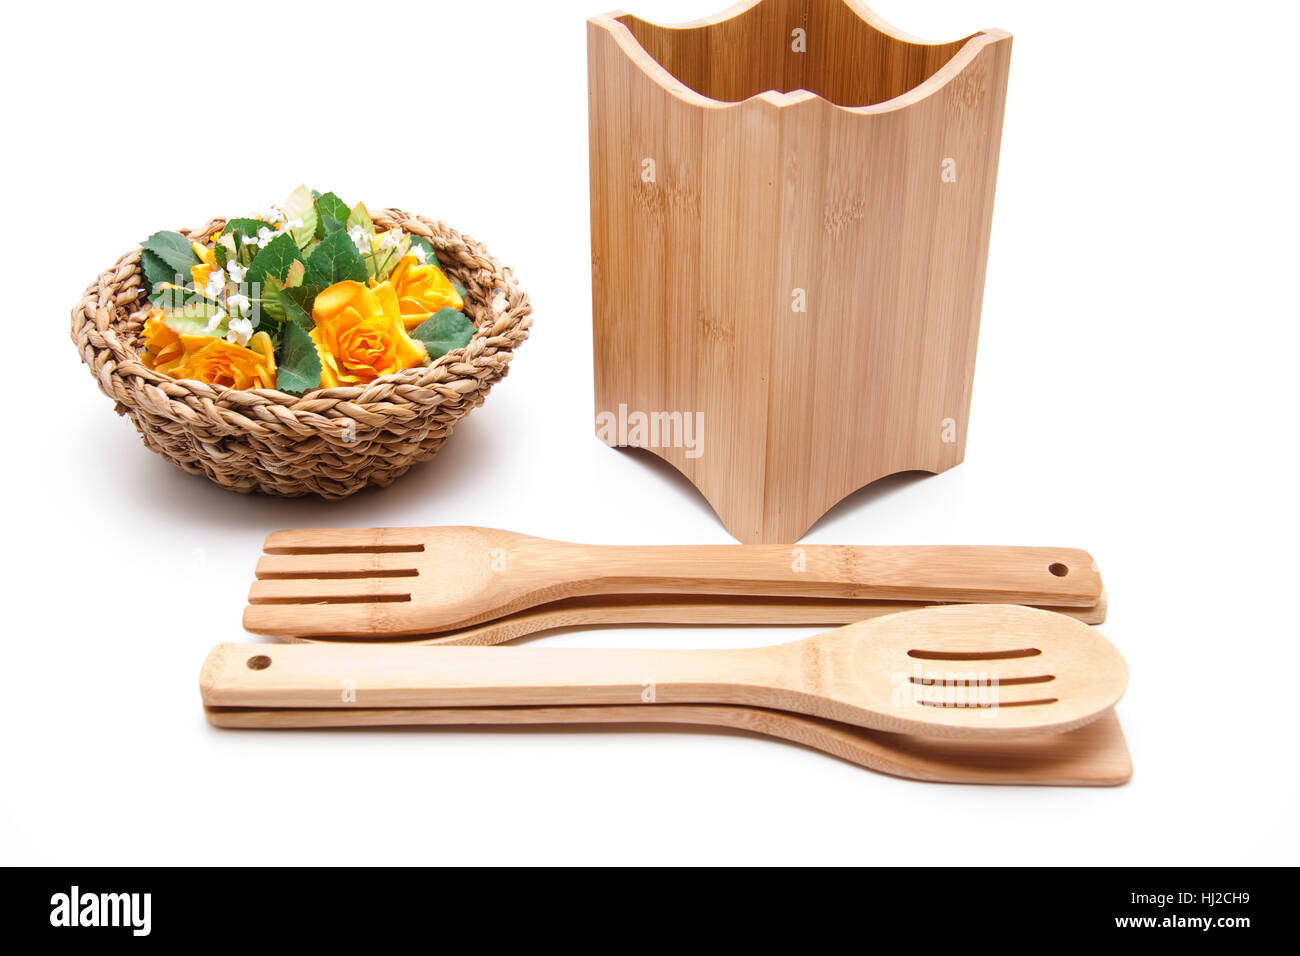 fork, wooden spoon, scraper, kitchenware, object, household, bloom, blossom, Stock Photo